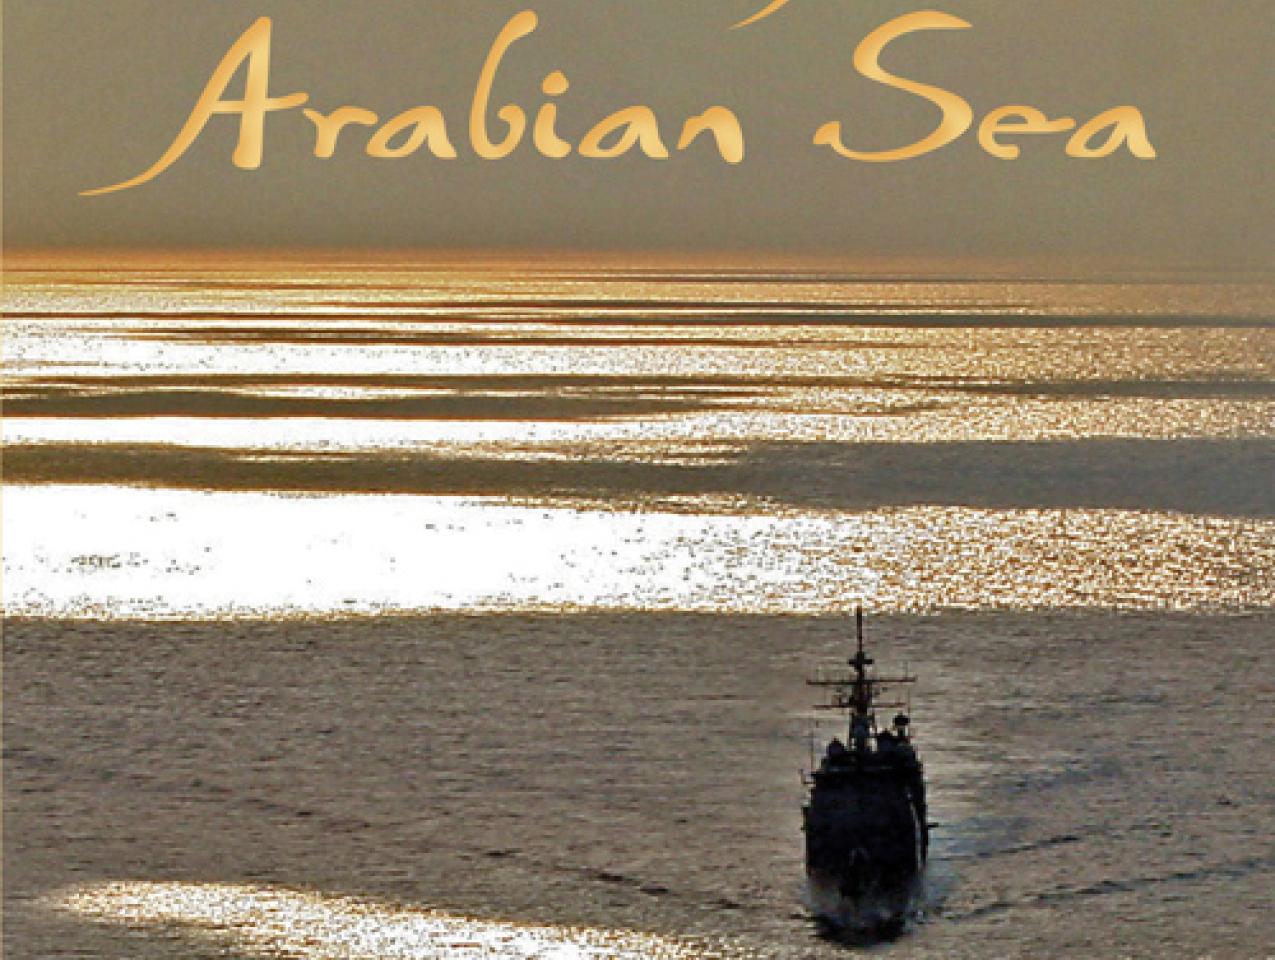 Jihad in the Arabian Sea by Camille Pecastaing 